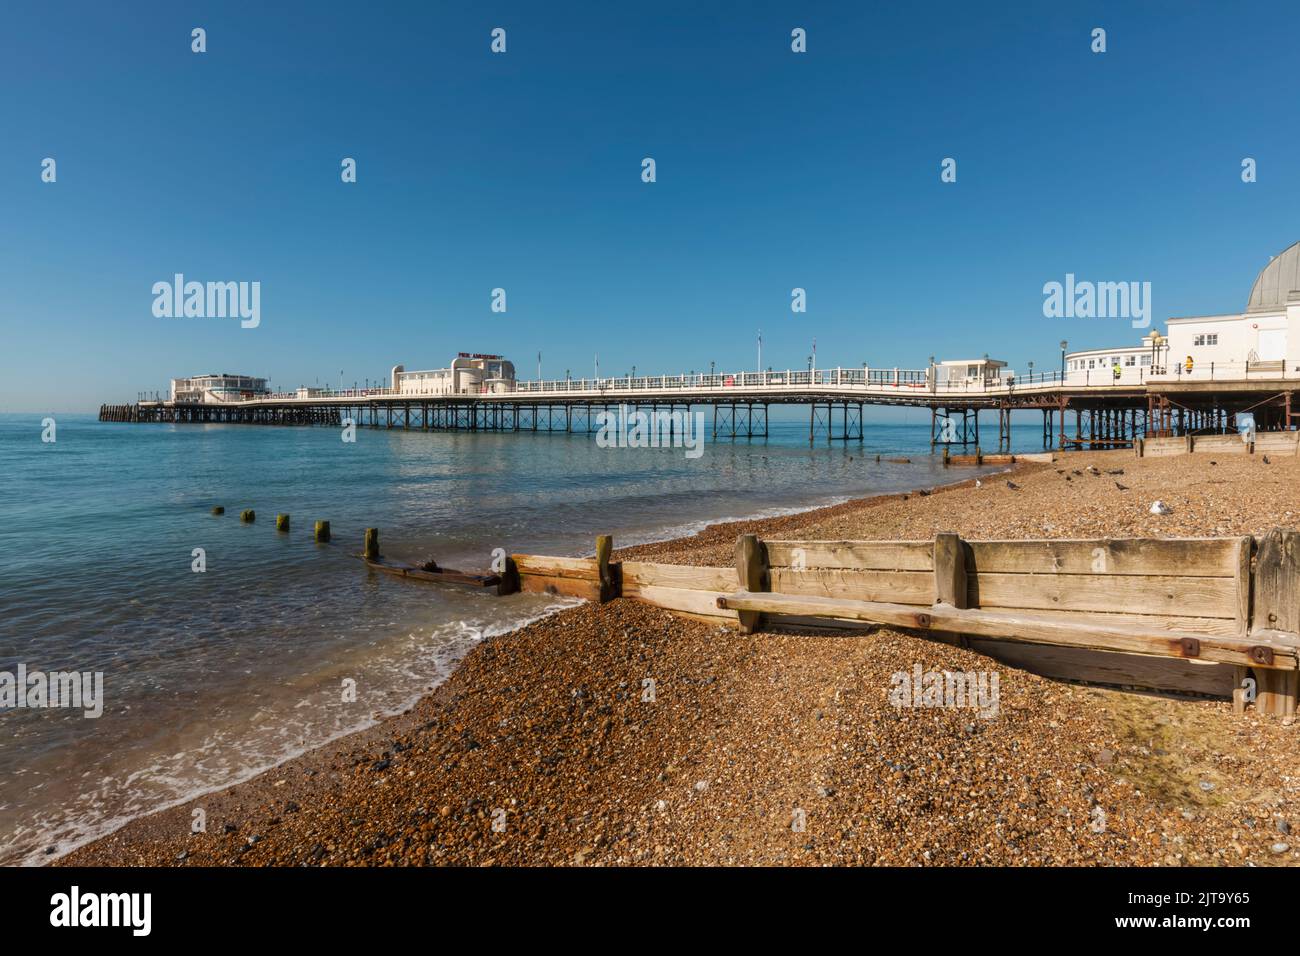 England, West Sussex, Worthing, Worthing Pier and Beach Stock Photo